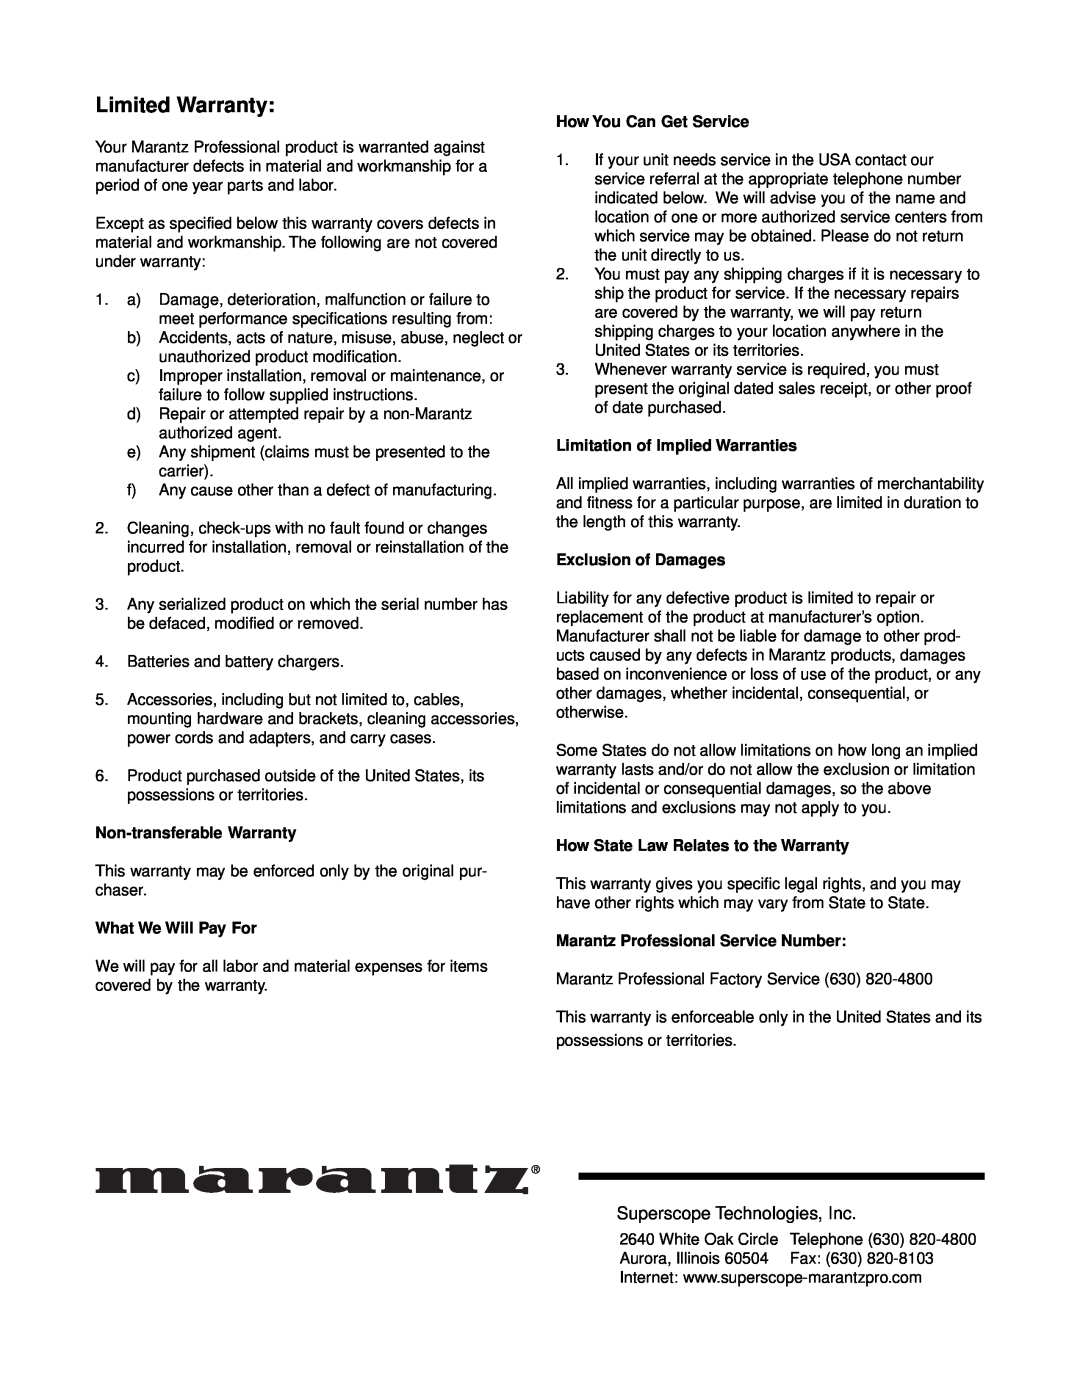 Marantz CDR300 manual Limited Warranty, Non-transferableWarranty, What We Will Pay For, How You Can Get Service 